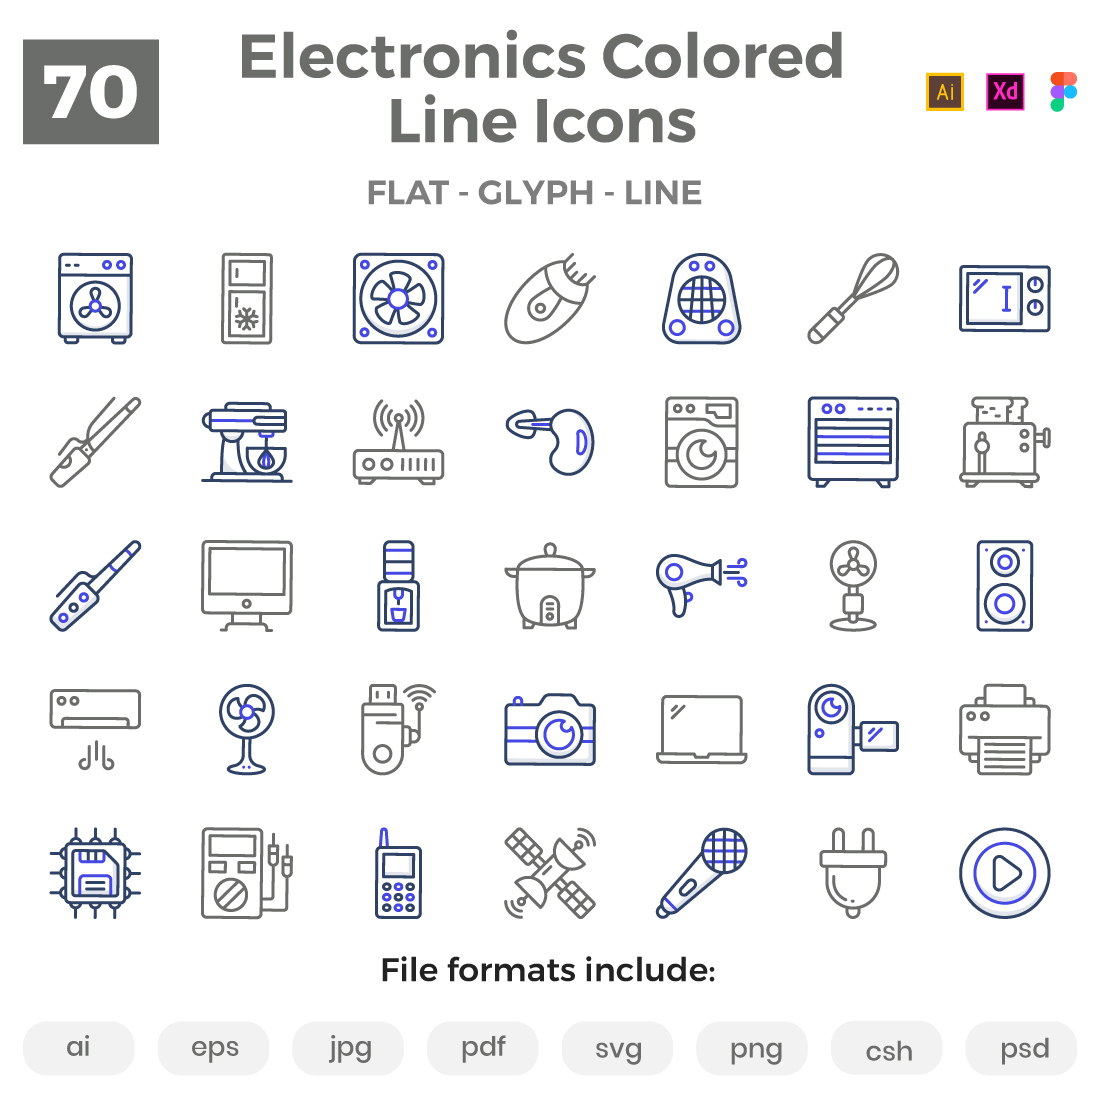 70 Appliance and Electronics Colored Line Icons cover image.